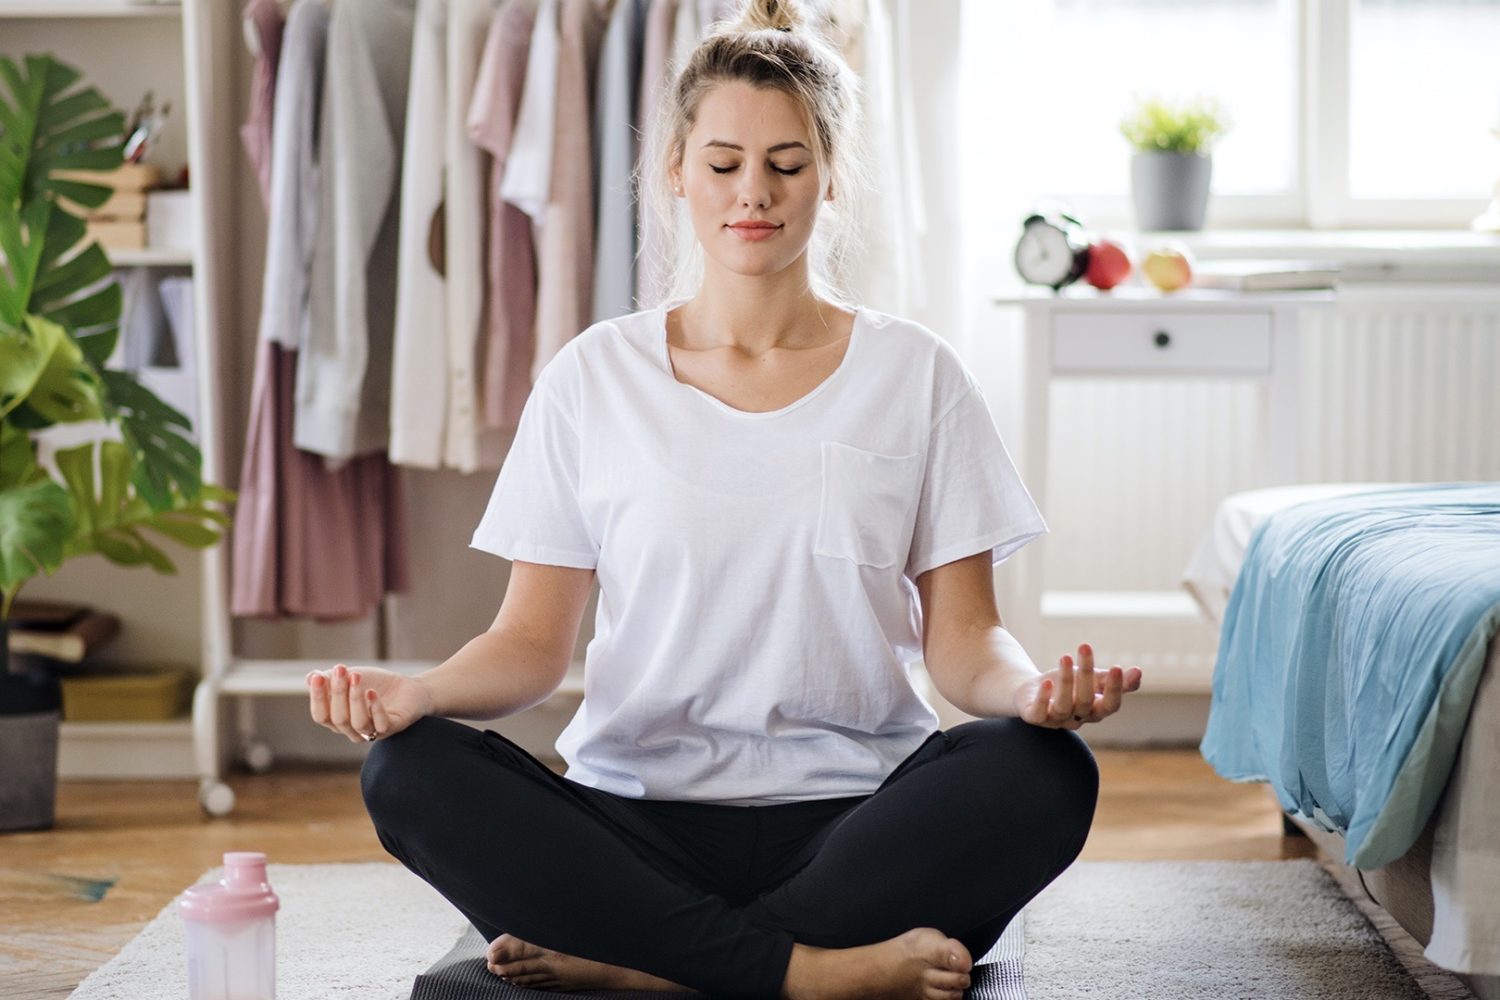 How to capture wellness, self-care, and mindfulness at home